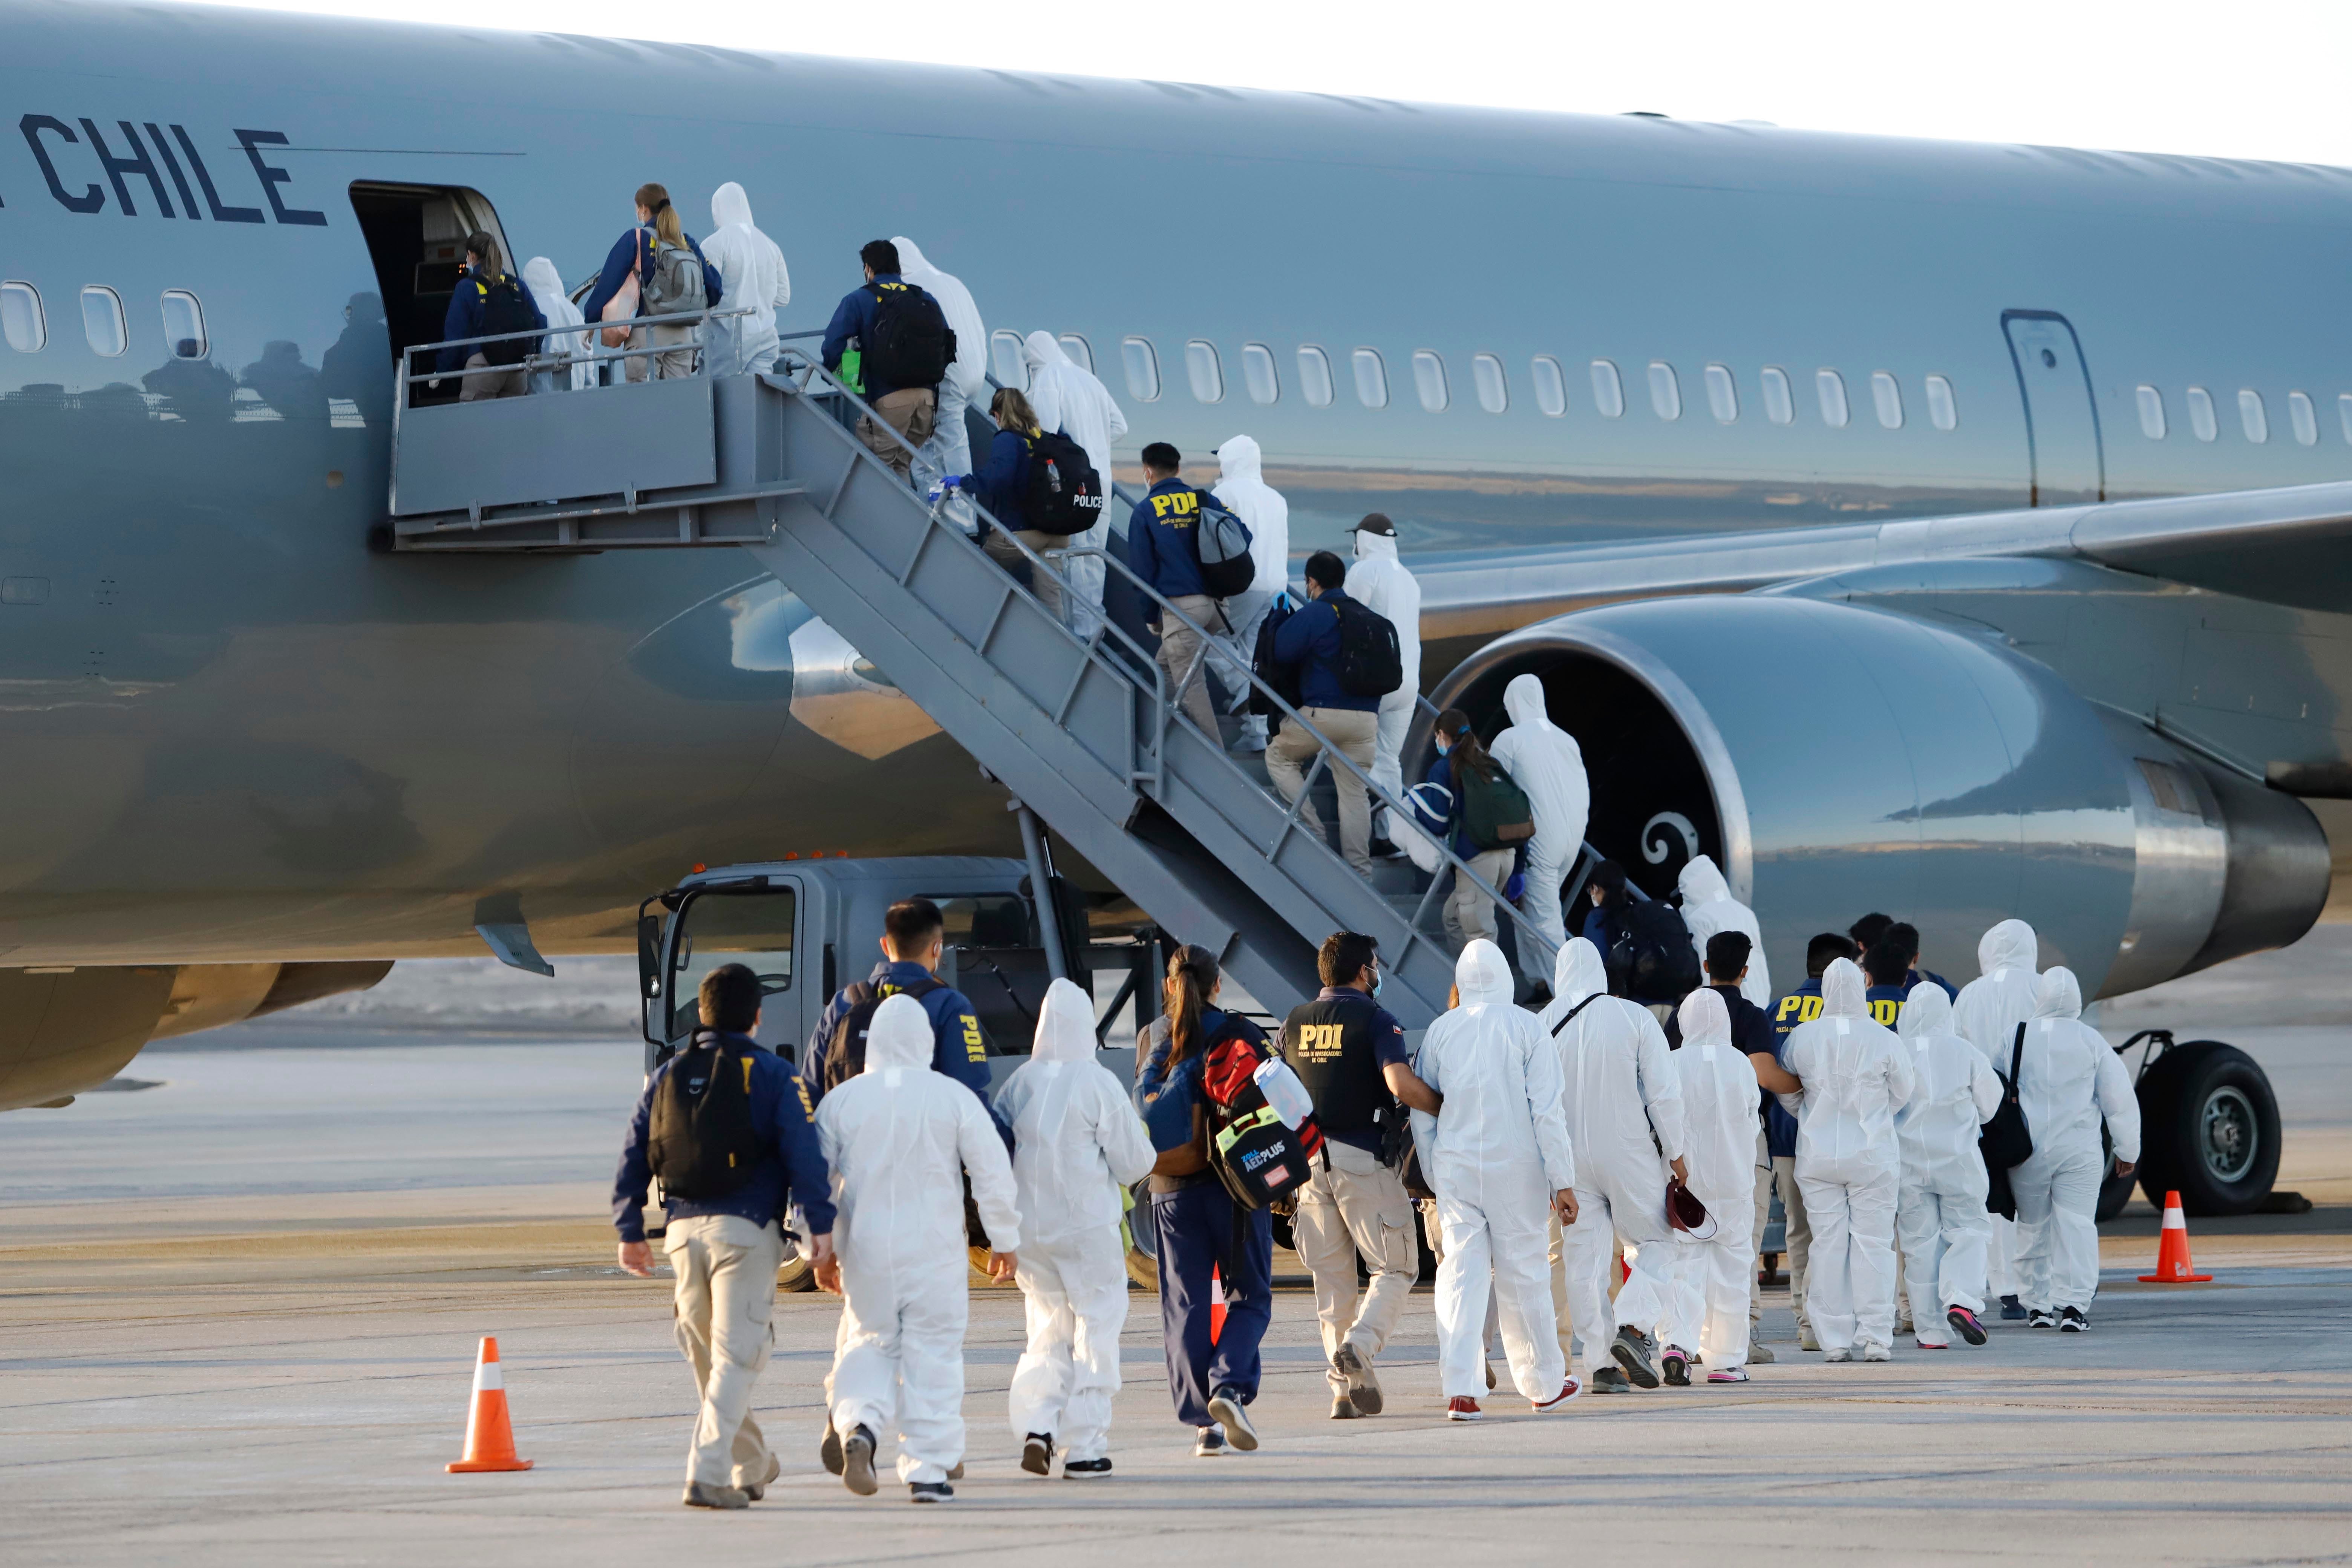 Venezuelan migrants board a plane as they are being deported from Chile, at the General Diego Aracena Aguilar International Airport in Iquique, Chile, on February 10, 2021. 